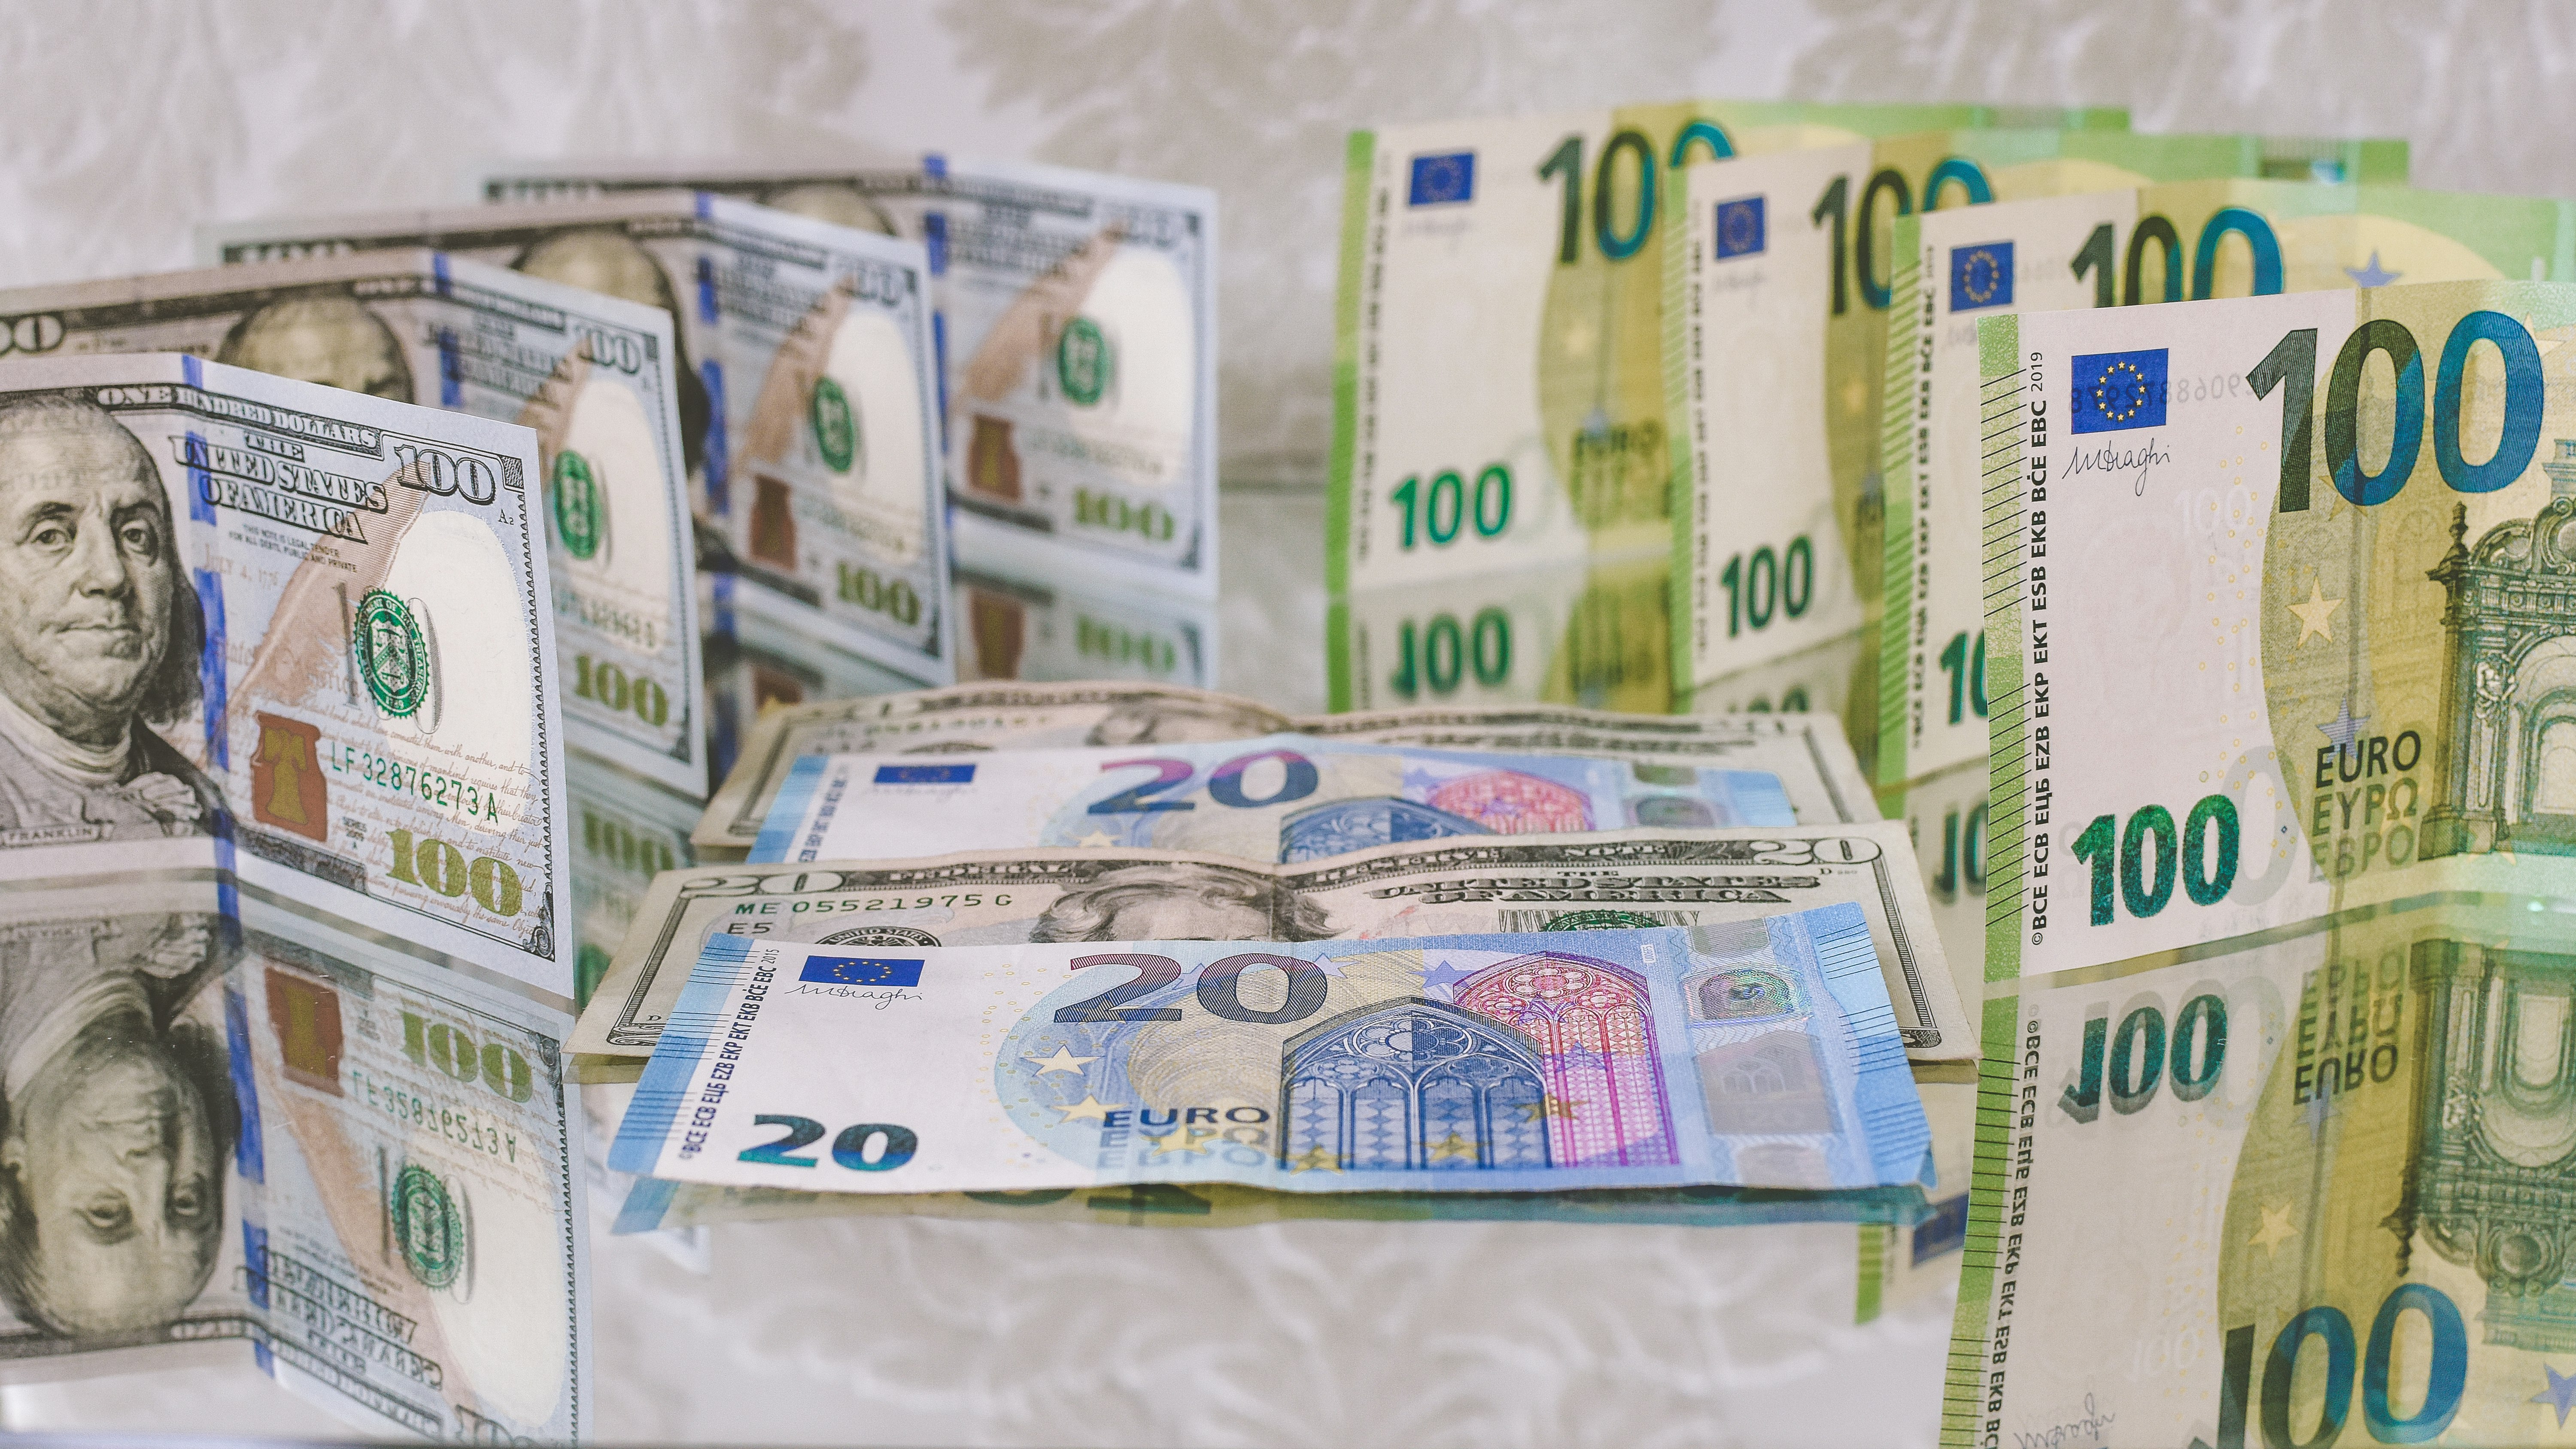 100, 20 Euro (EUR), and 100, 20 Dollar (USD) banknotes placed back-to-back vertically and horizontally on a reflecting surface.